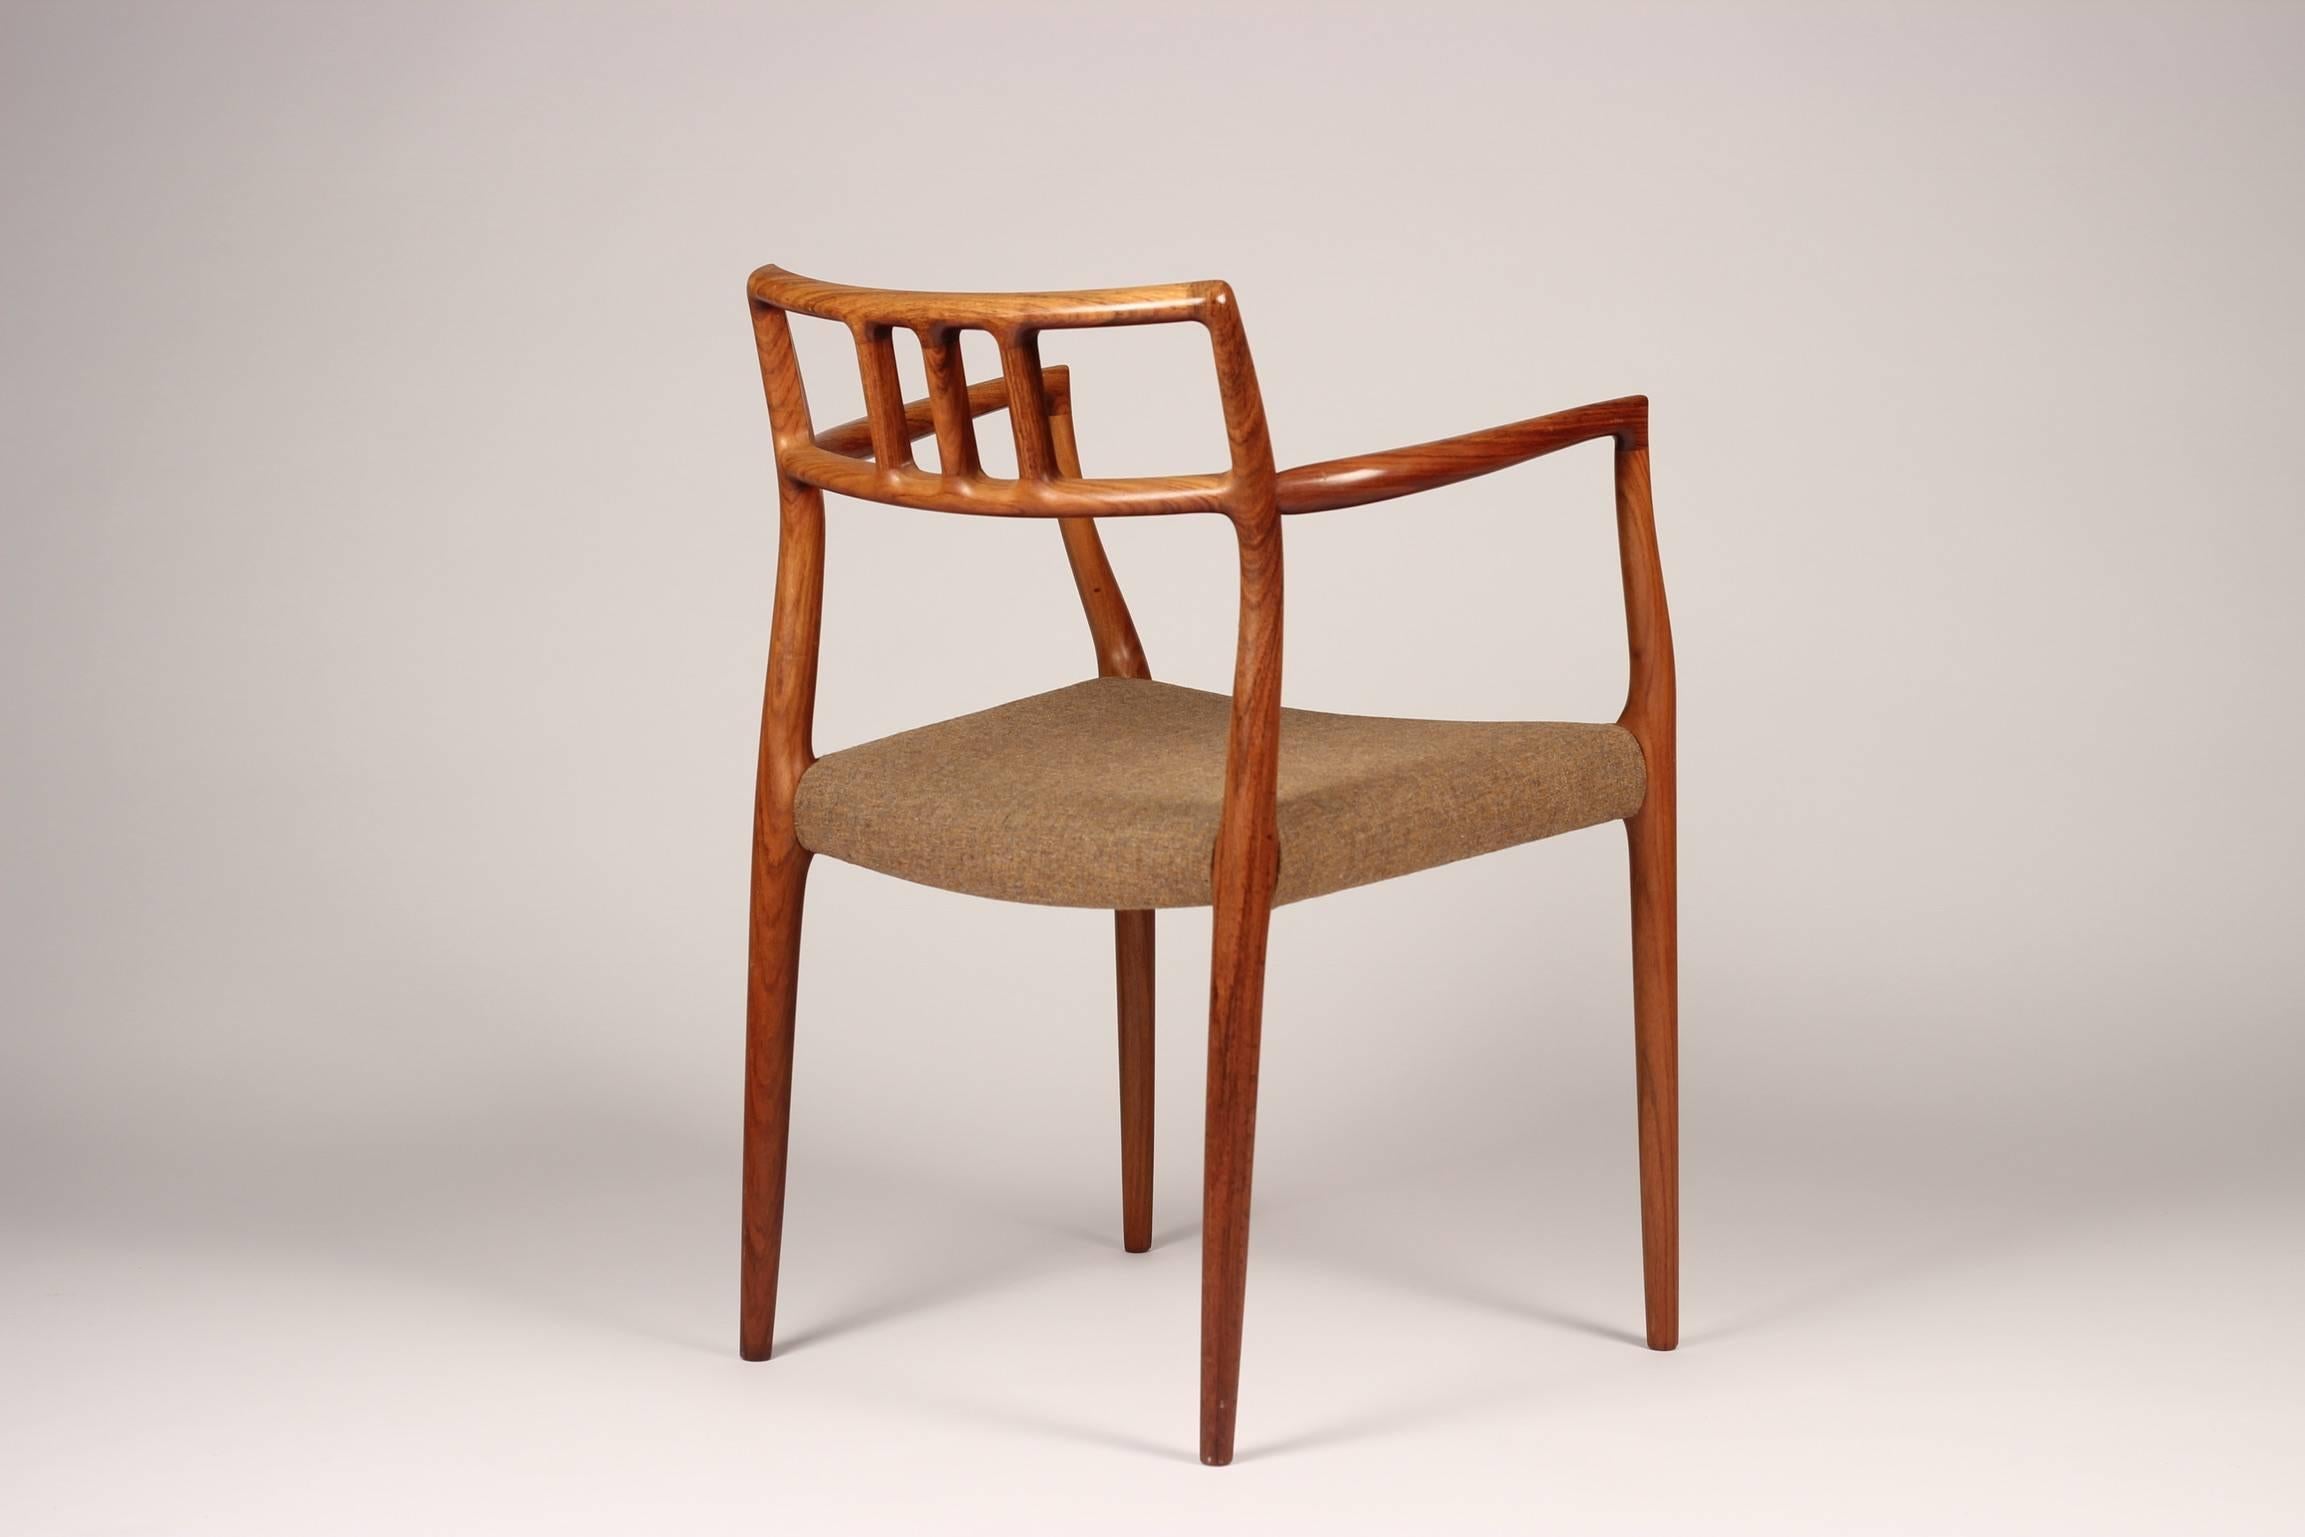 A beautiful, timeless and rare pair of model no.64 rosewood dining chairs designed by Niels O. Møller and made by J.L Møller Møbelfabrik. The chairs were discovered as a pair and are in wonderful original condition, with the potential to recover in